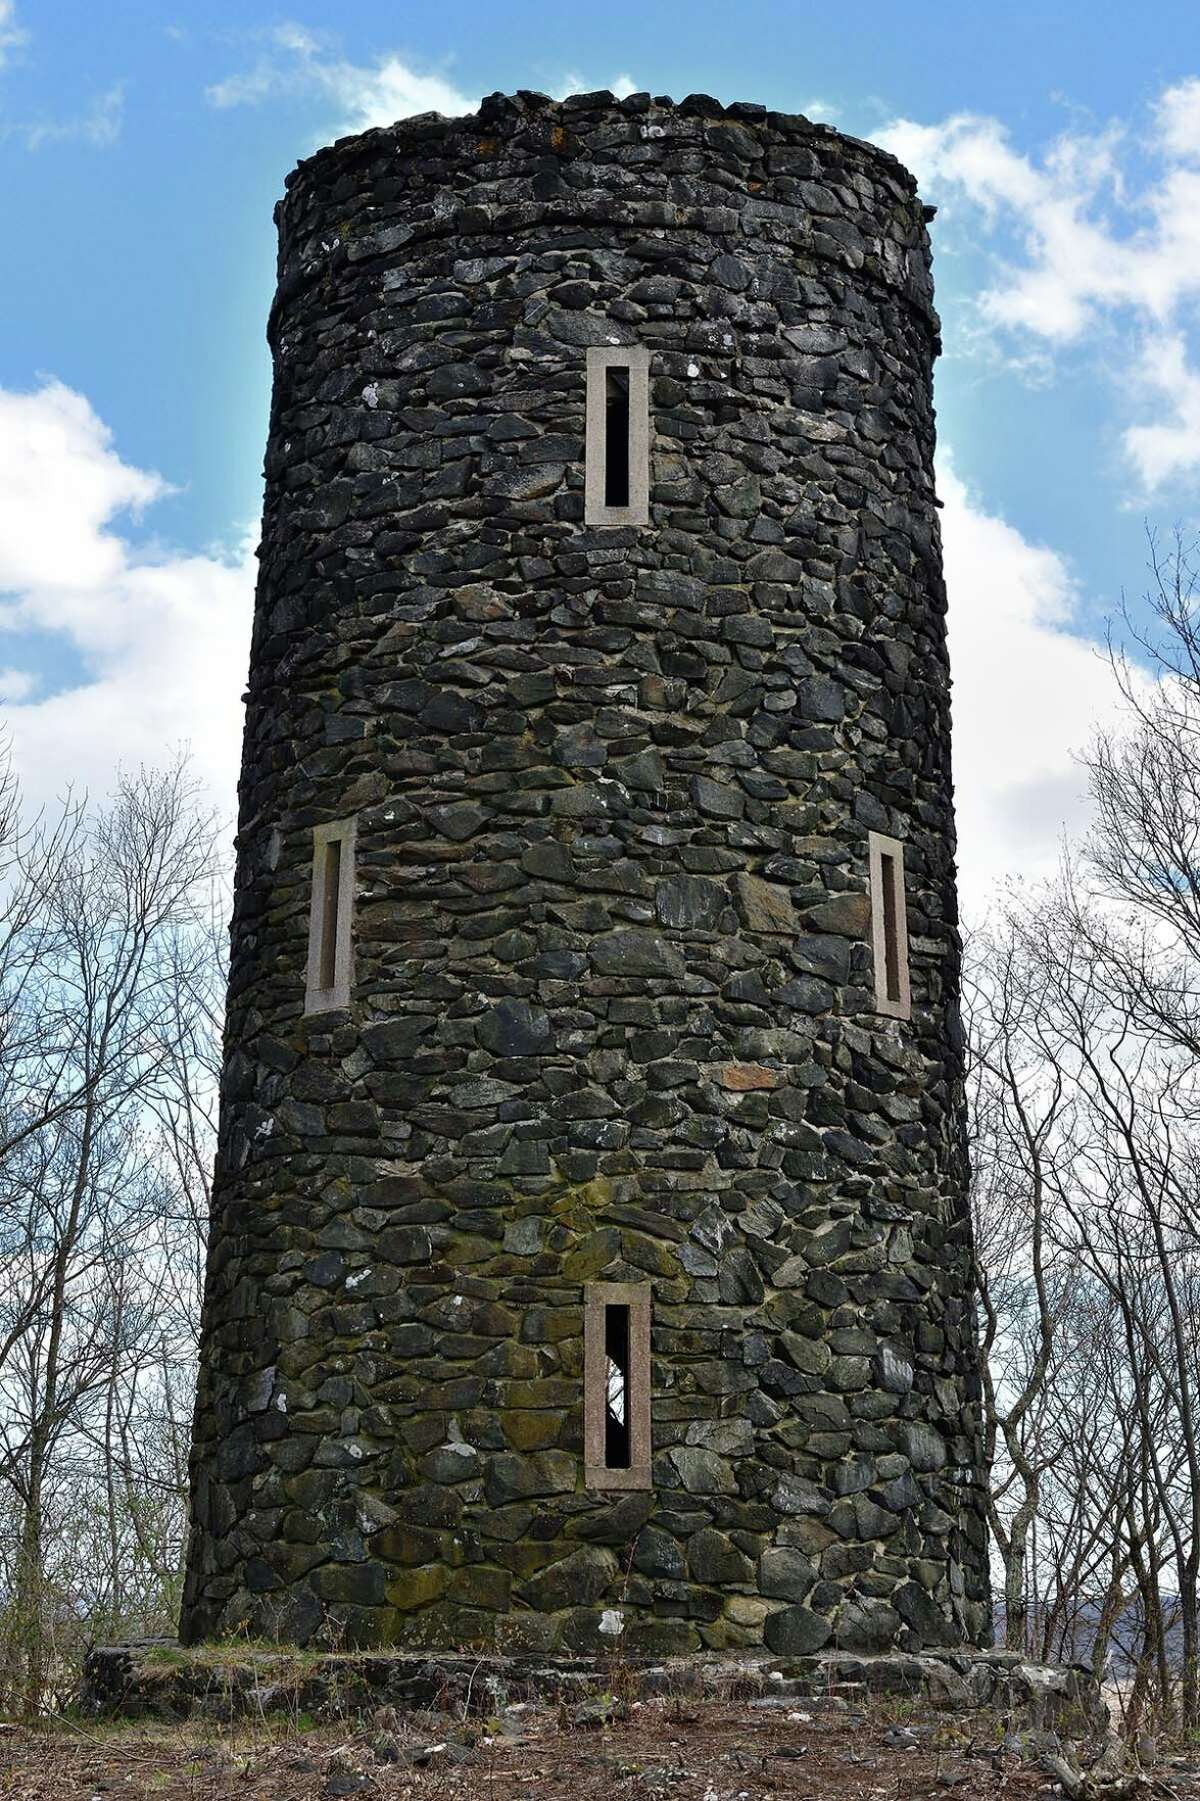 Historic stone tower at Mount Tom State Park, one of the oldest state parks in Connecticut. The tower is on the National Register of Historic Places. It is constructed mostly of gneiss, a metamorphic rock.